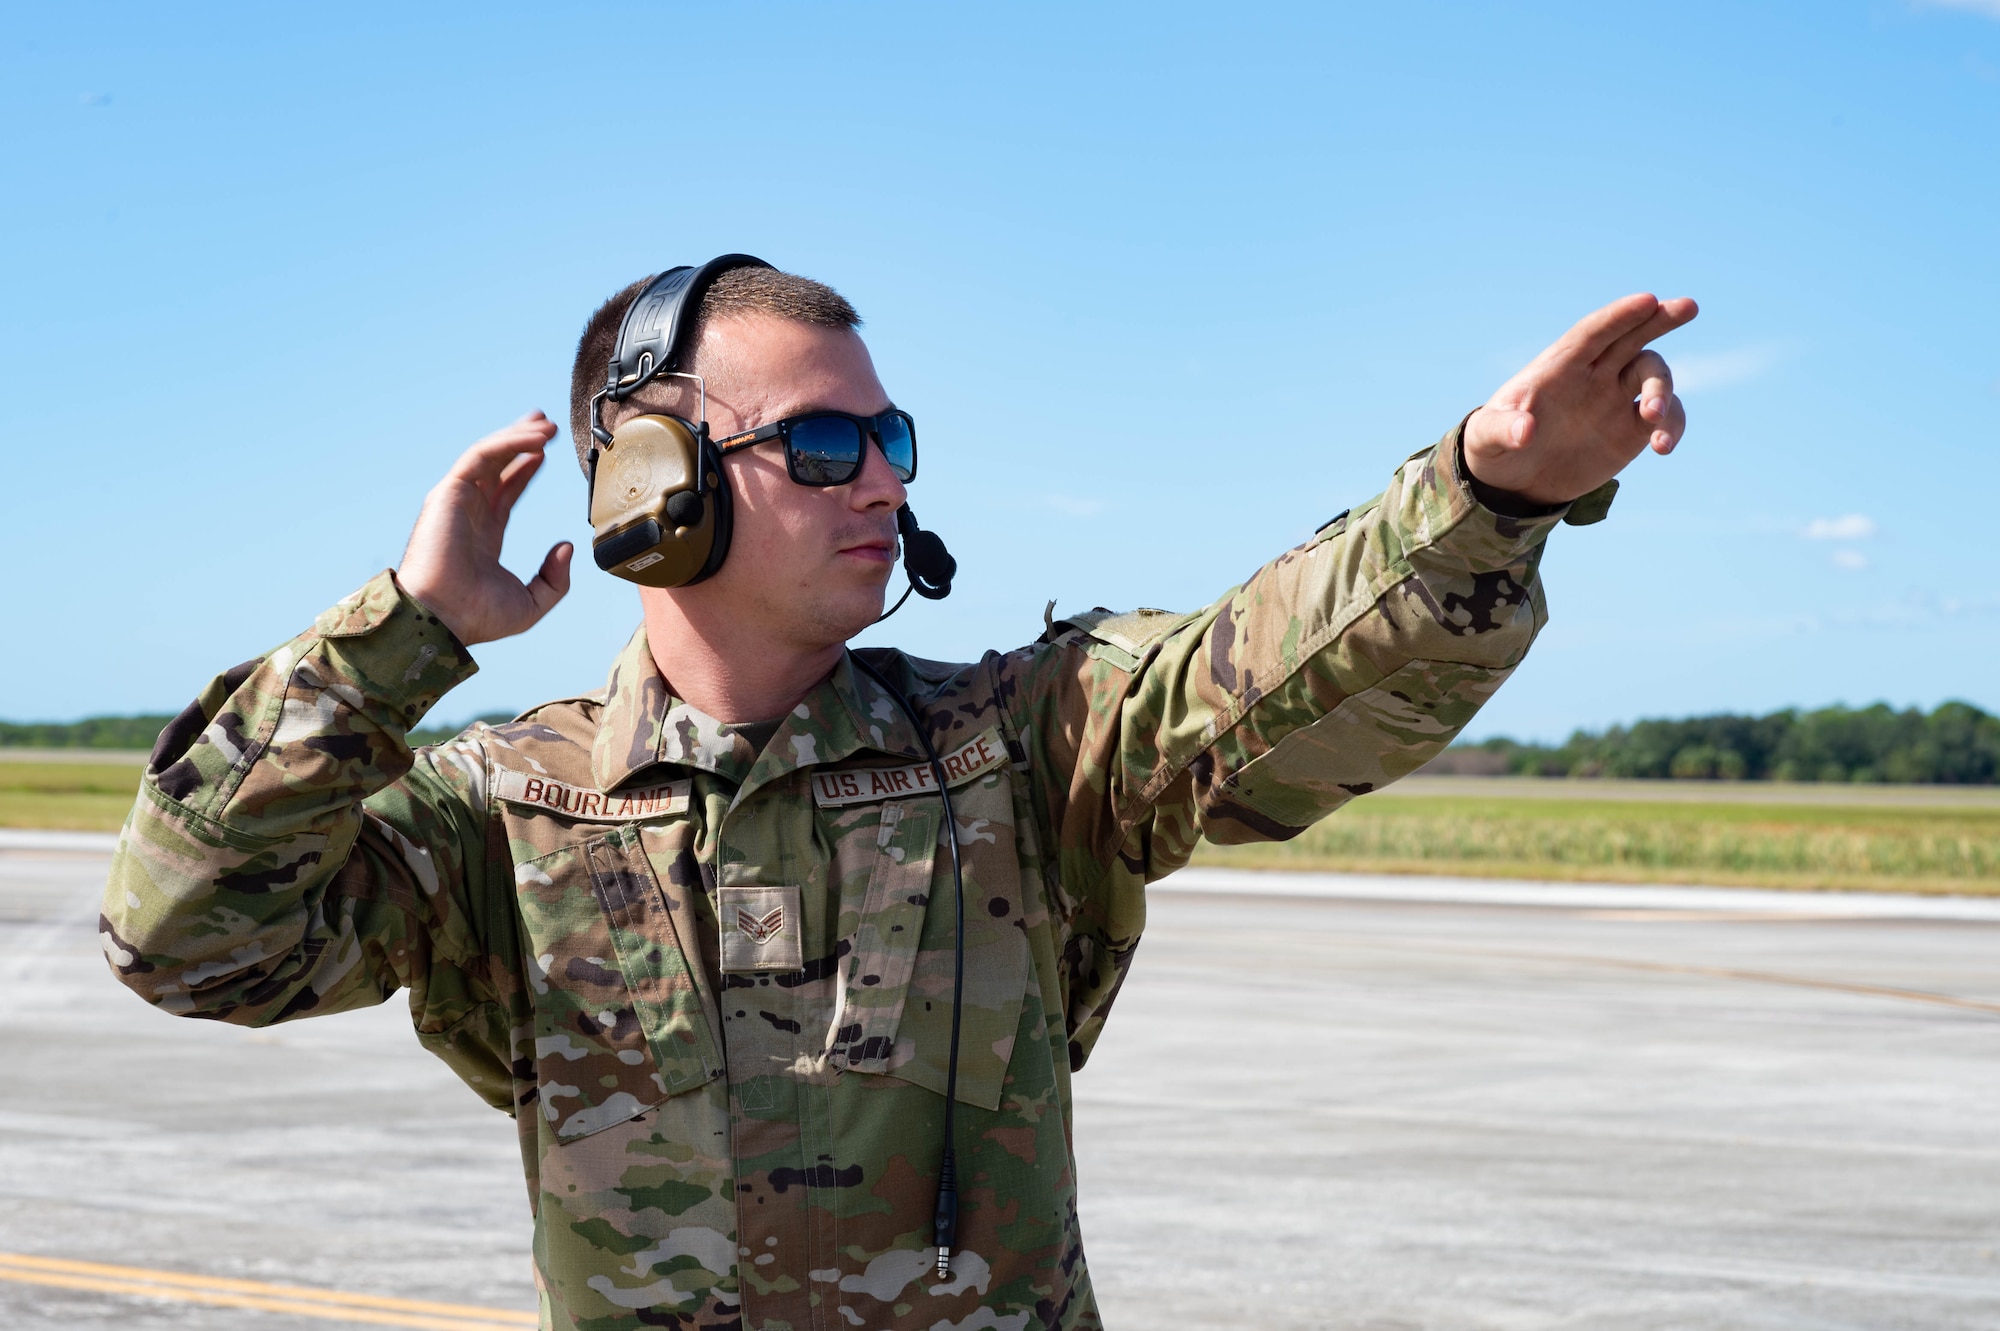 A photo of an Airman marshalling.